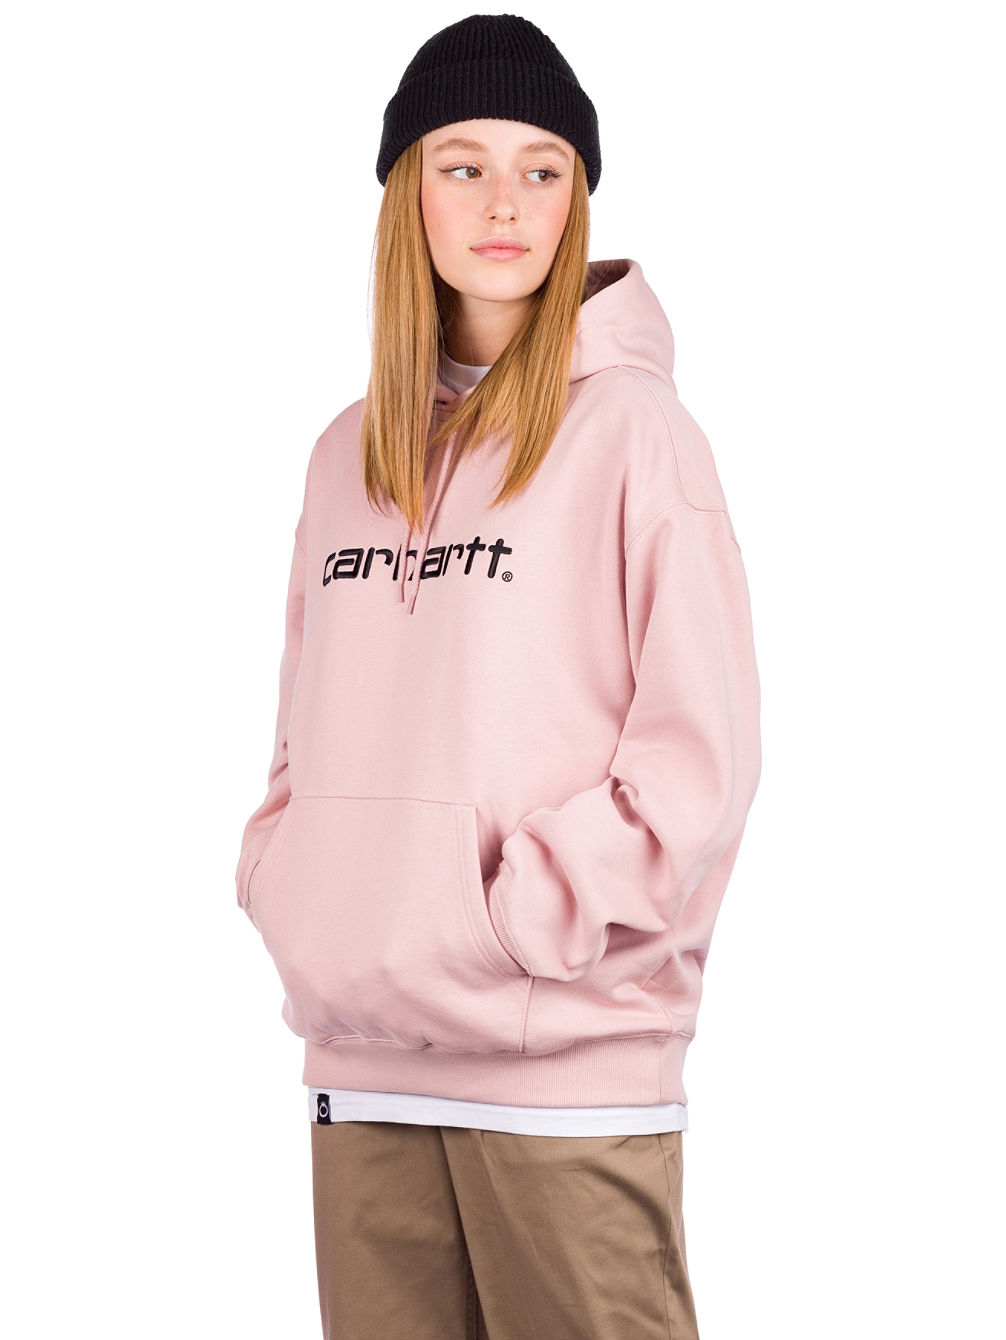 Carhartt Pulover s kapuco